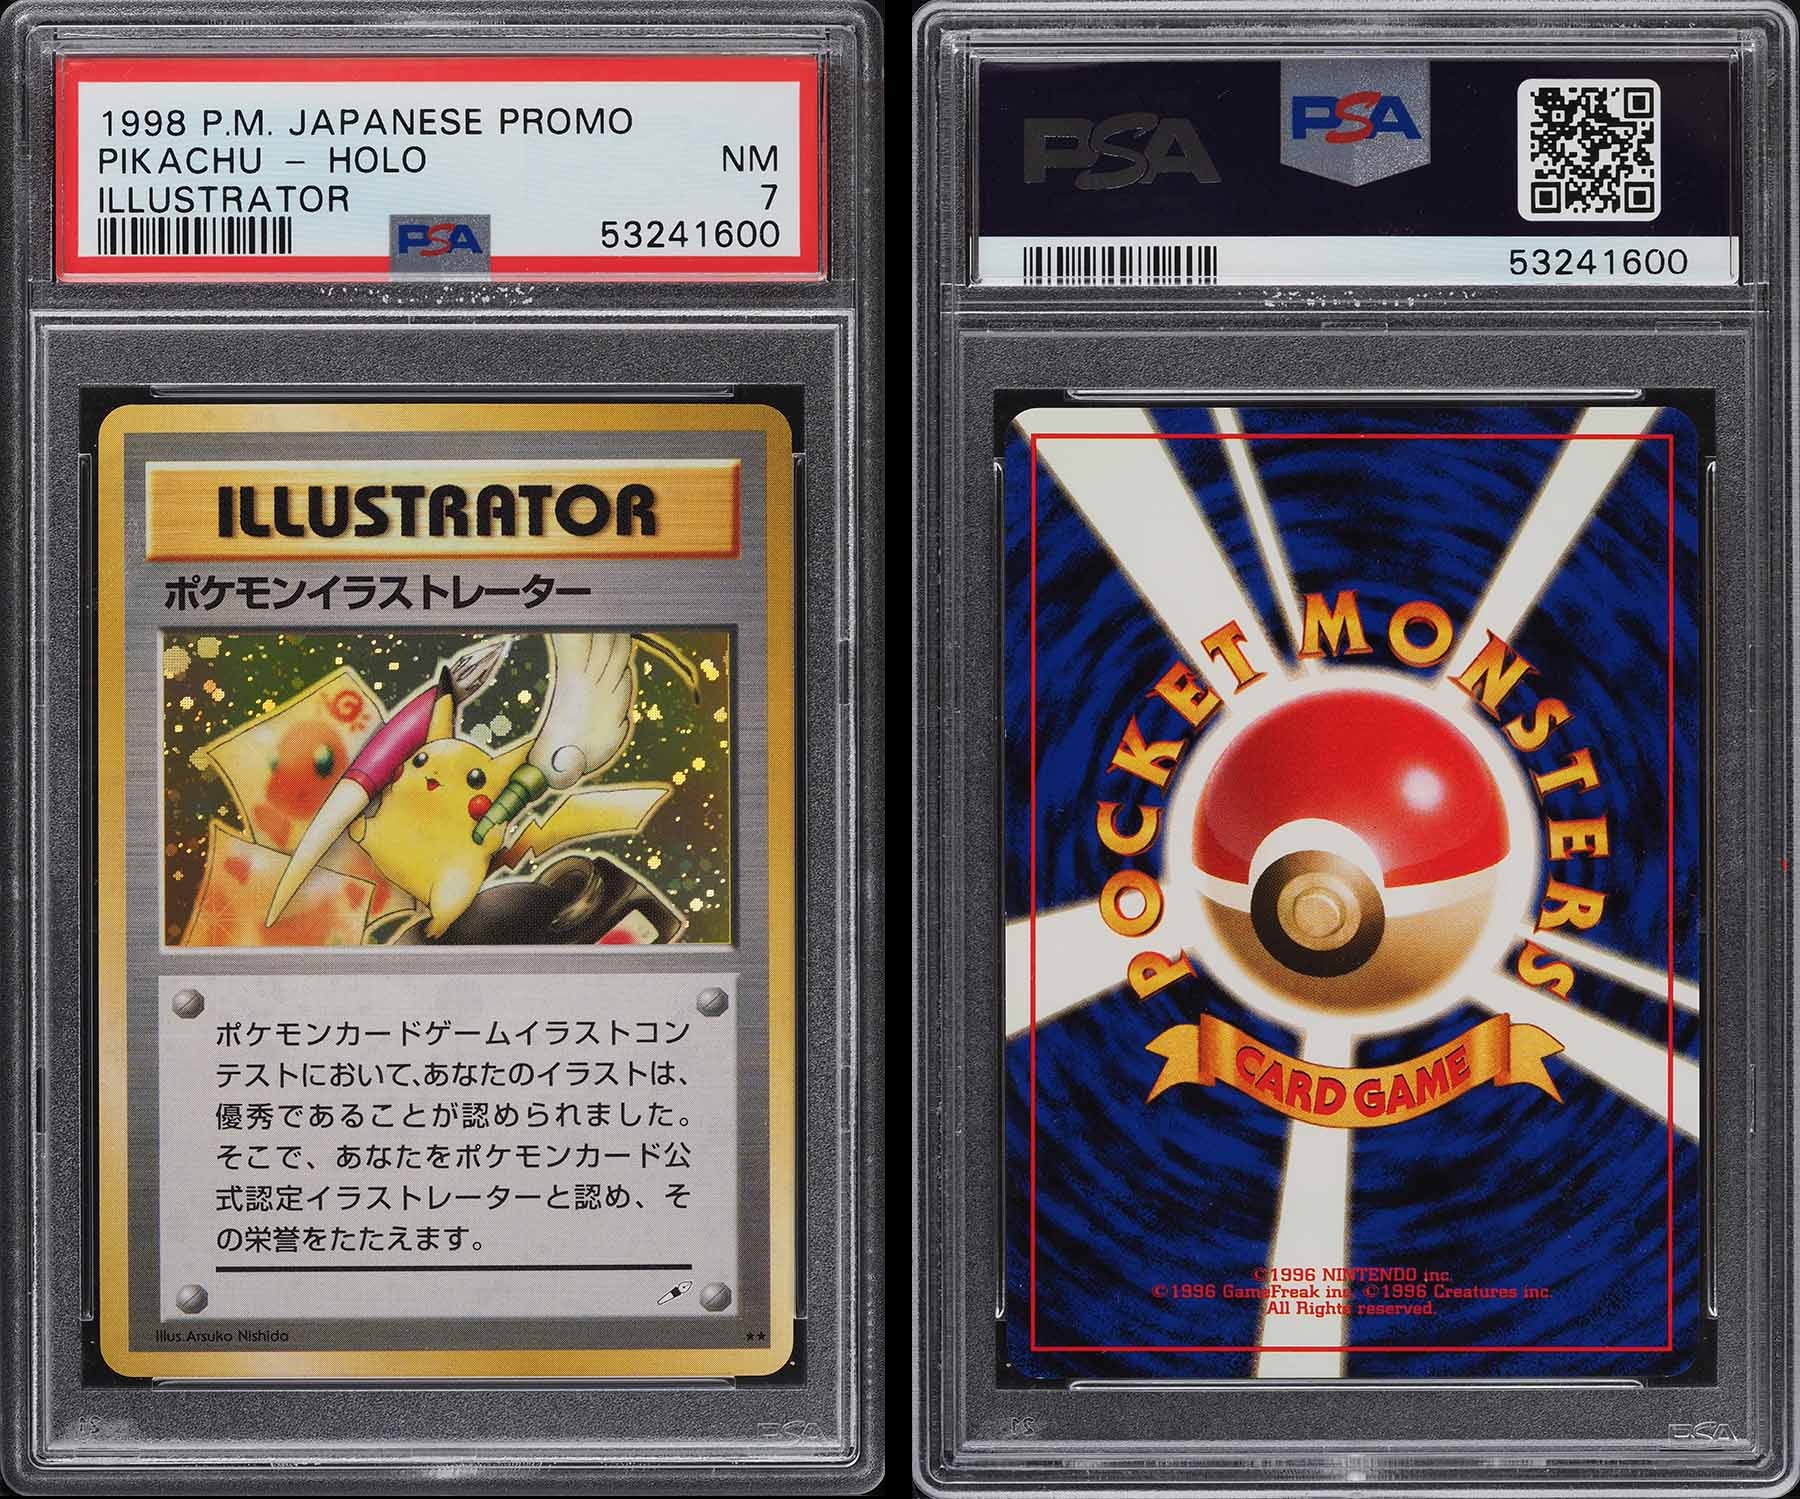 Classic Vintage Old School Pokemon 1st 2nd Generation 3 Card Holo Rare Lot *Real 